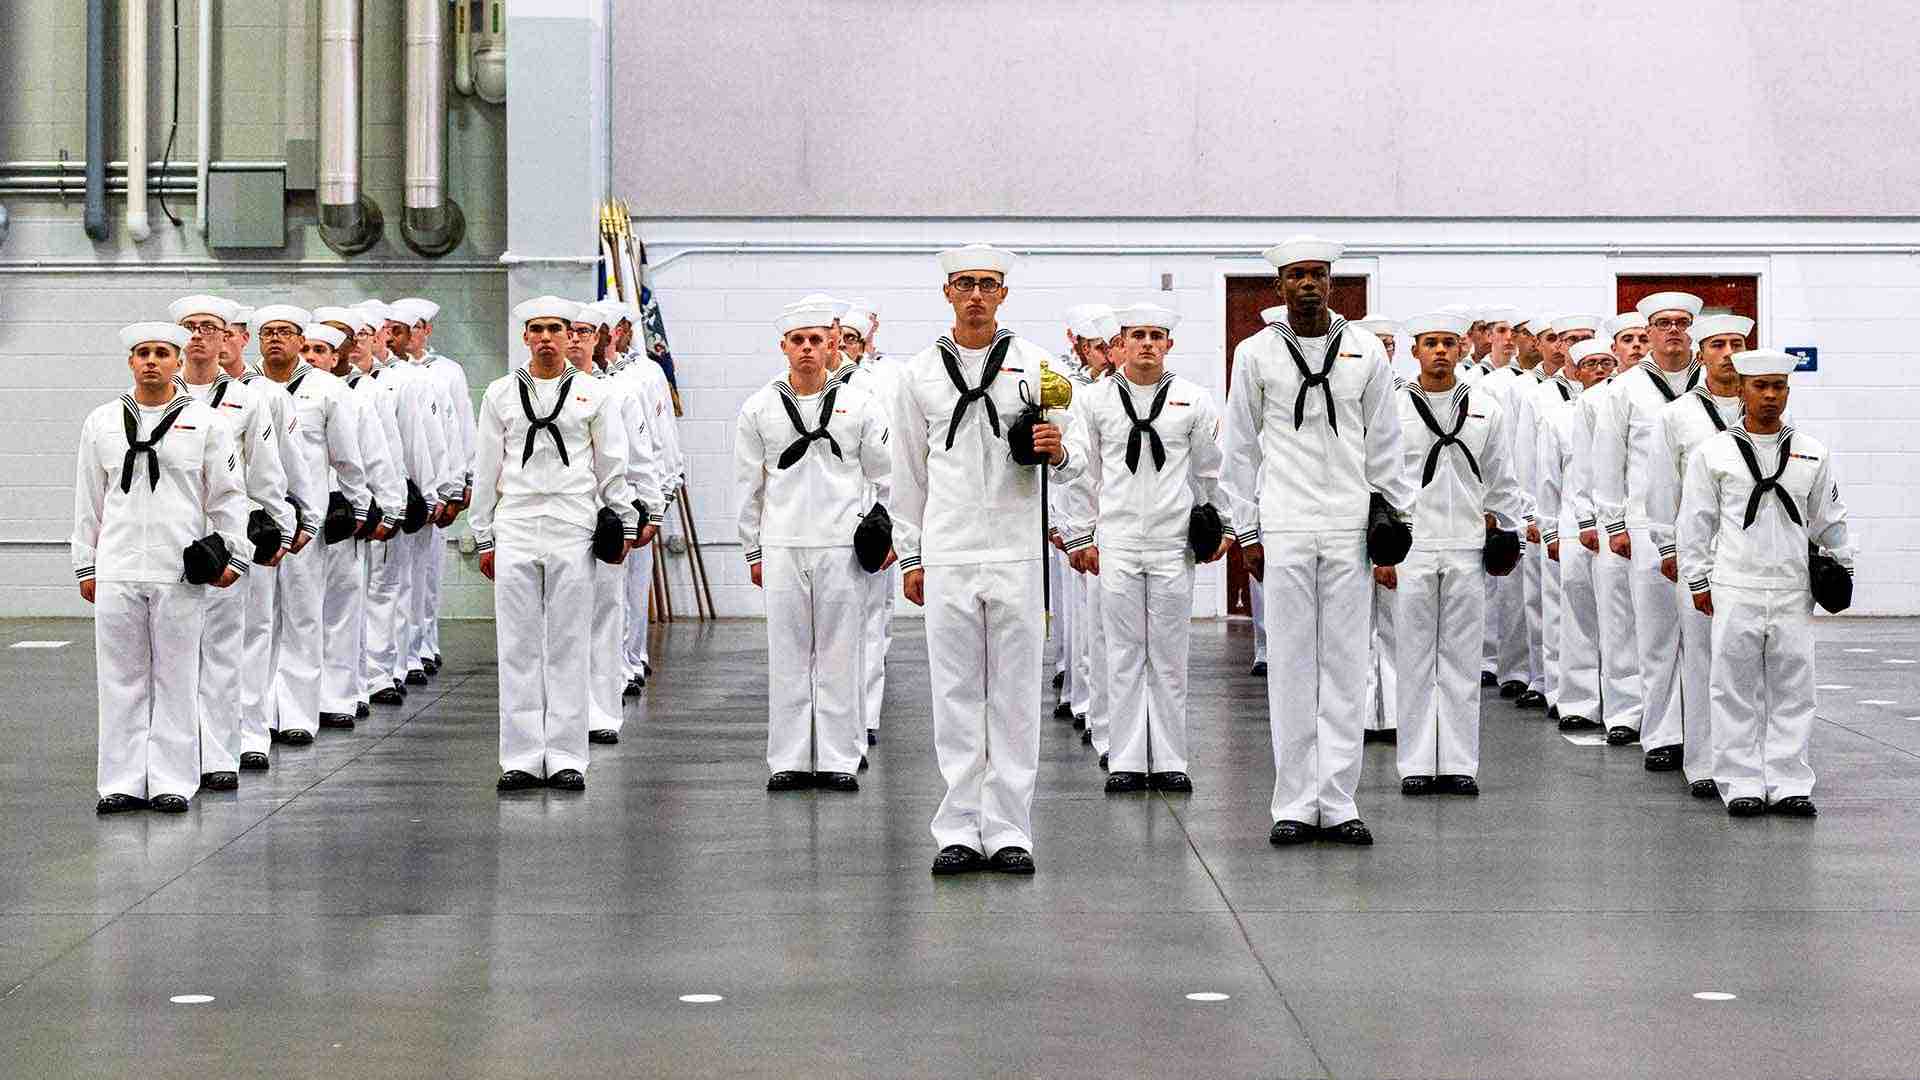 Navy Boot Camp graduates stand at attention as they attend graduation at Recruit Training Command in Great Lakes, IL. 